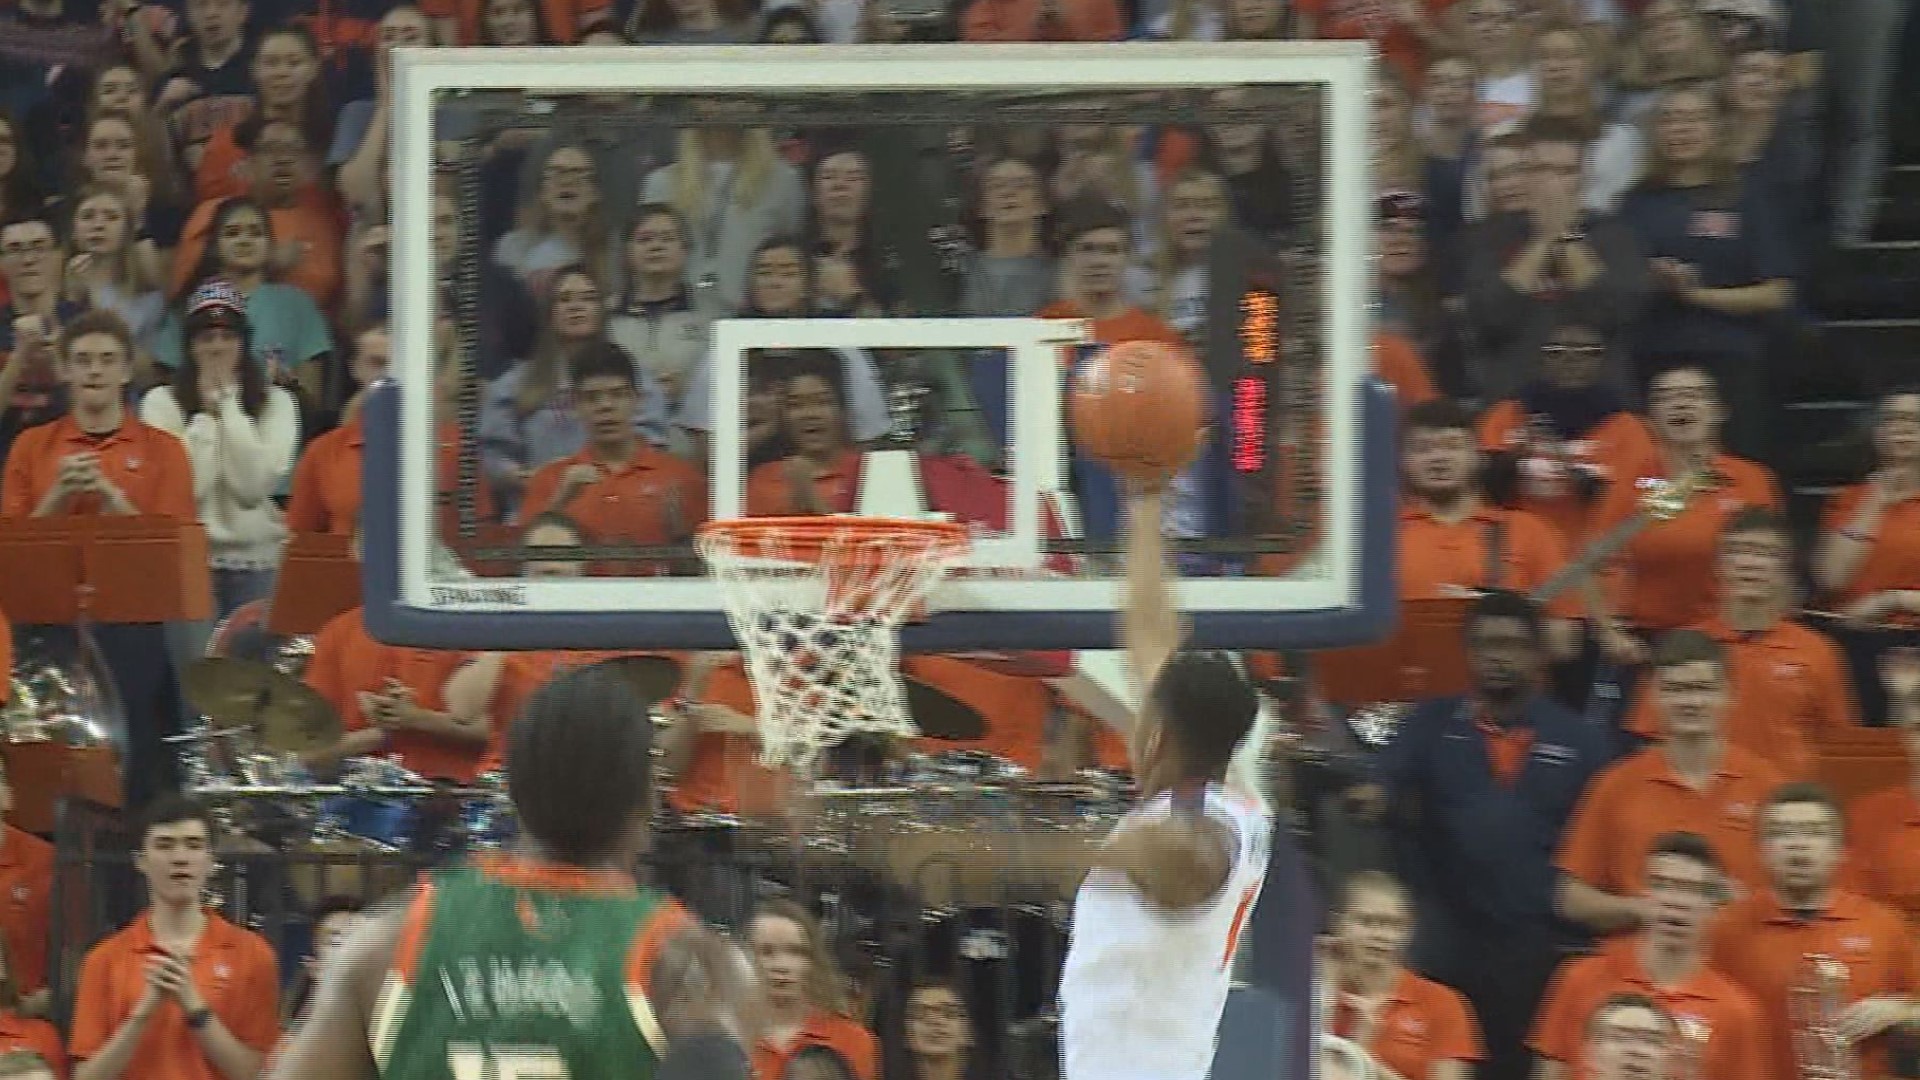 Virginia used a 9-0 run in the first half to take an 18-11 lead and never trailed again.